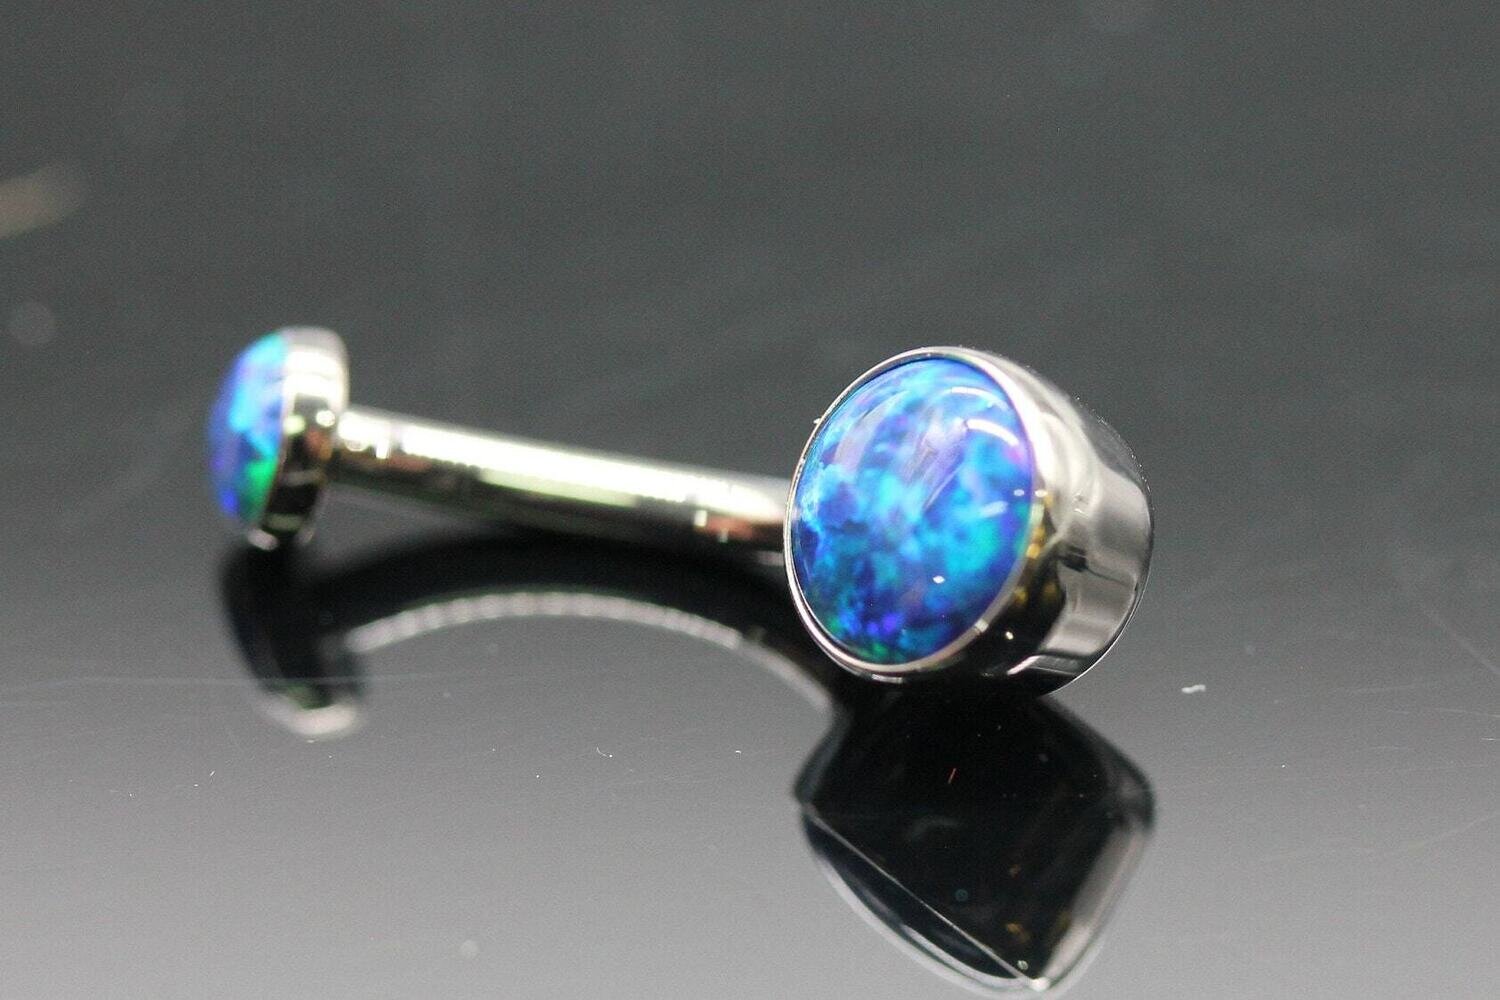 Anatometal Titanium Bezel Navel Curve with Dark Blue synthetic opal stones 5mm bottom and 3mm top